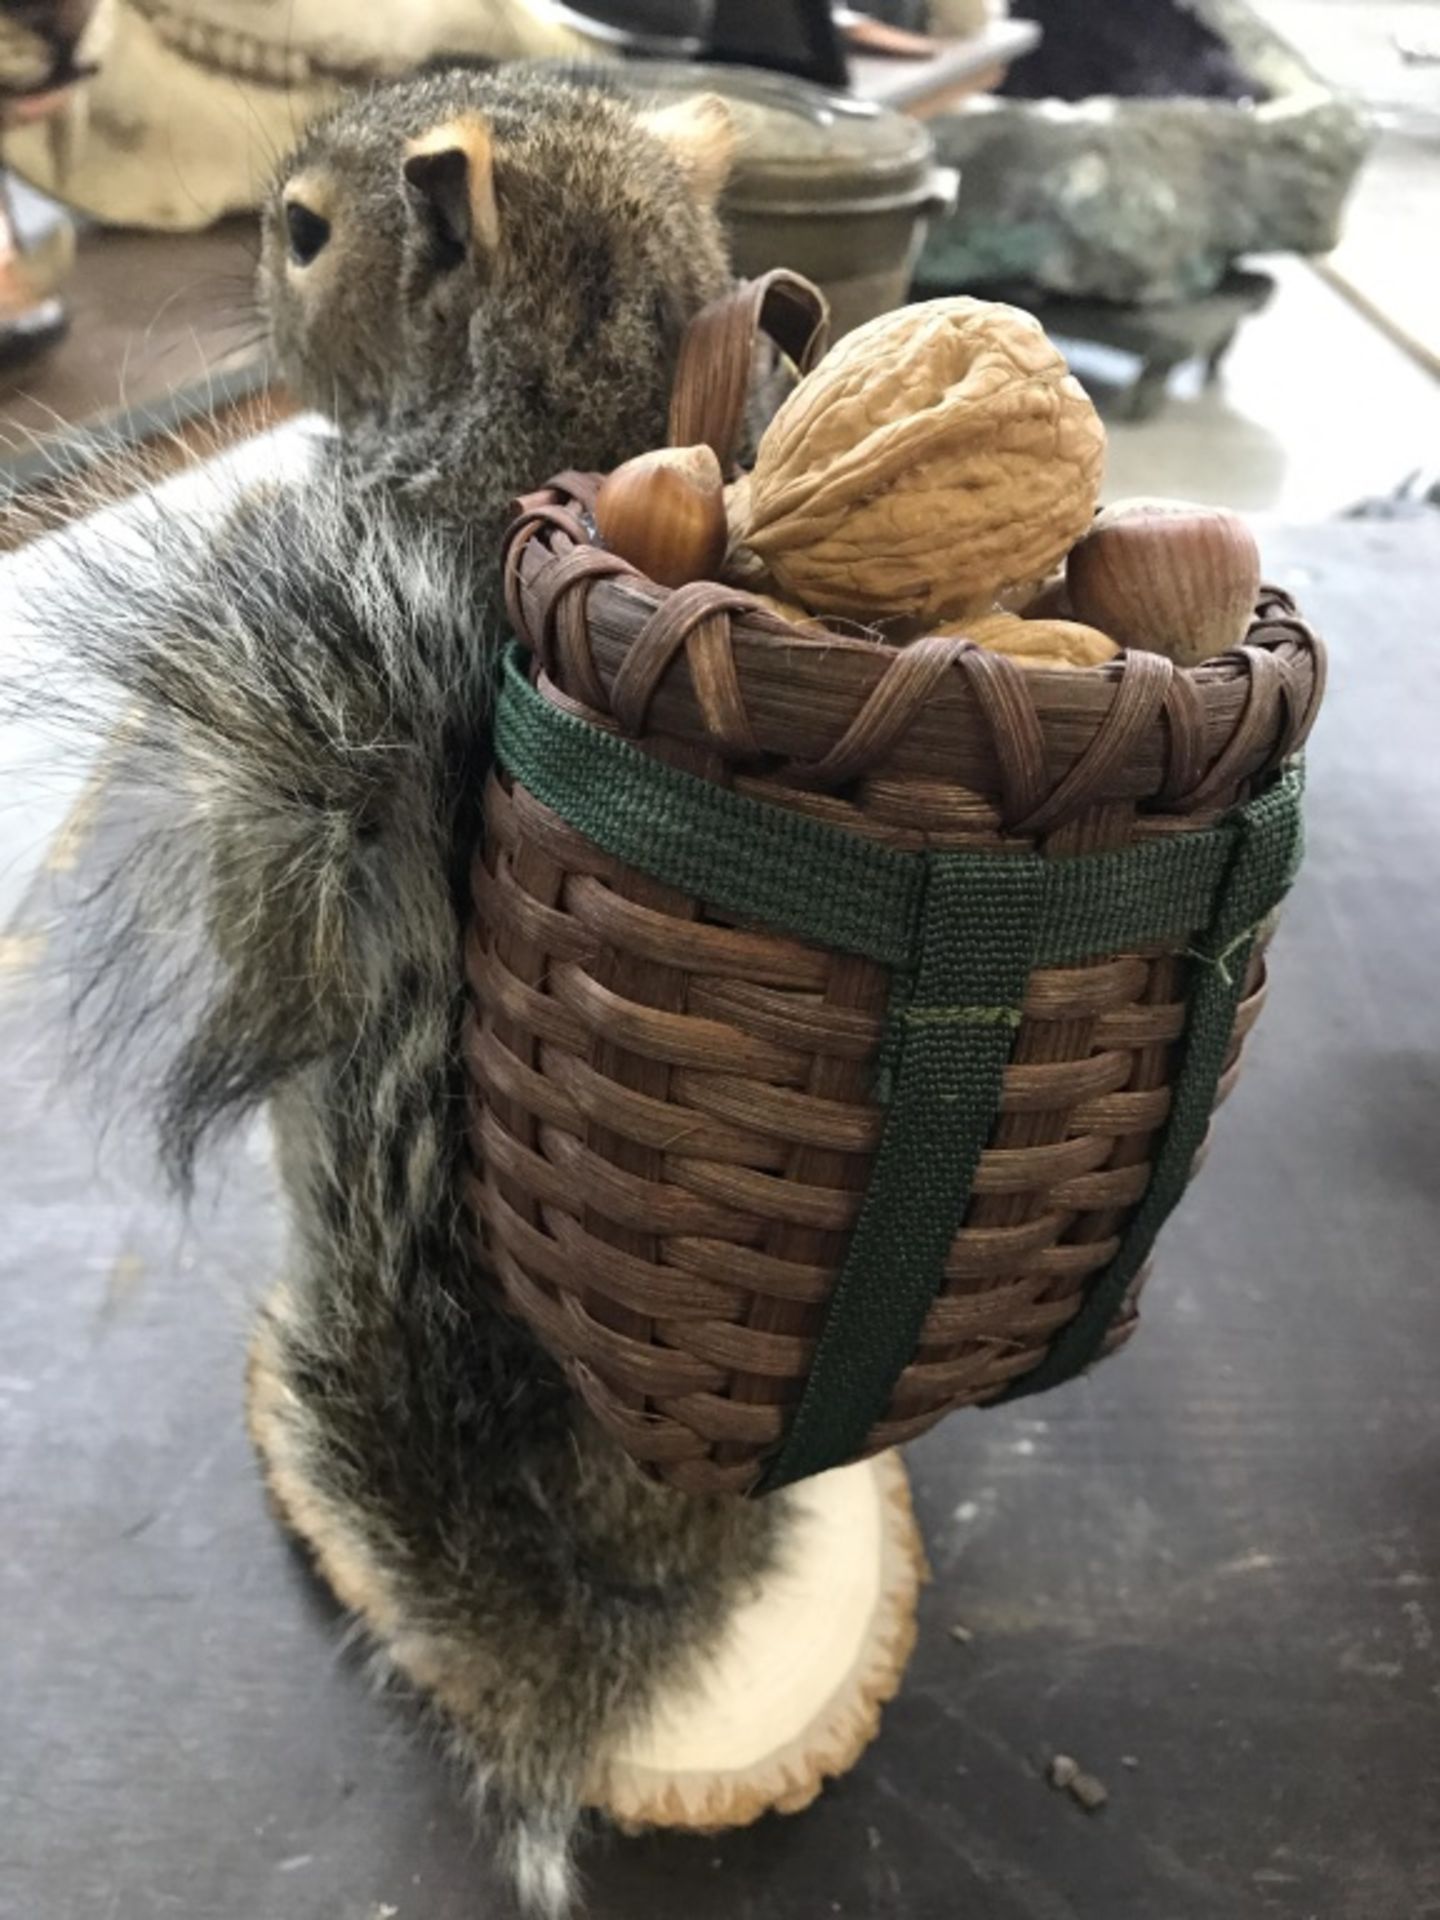 Squirrel, Back Packing - Image 11 of 13